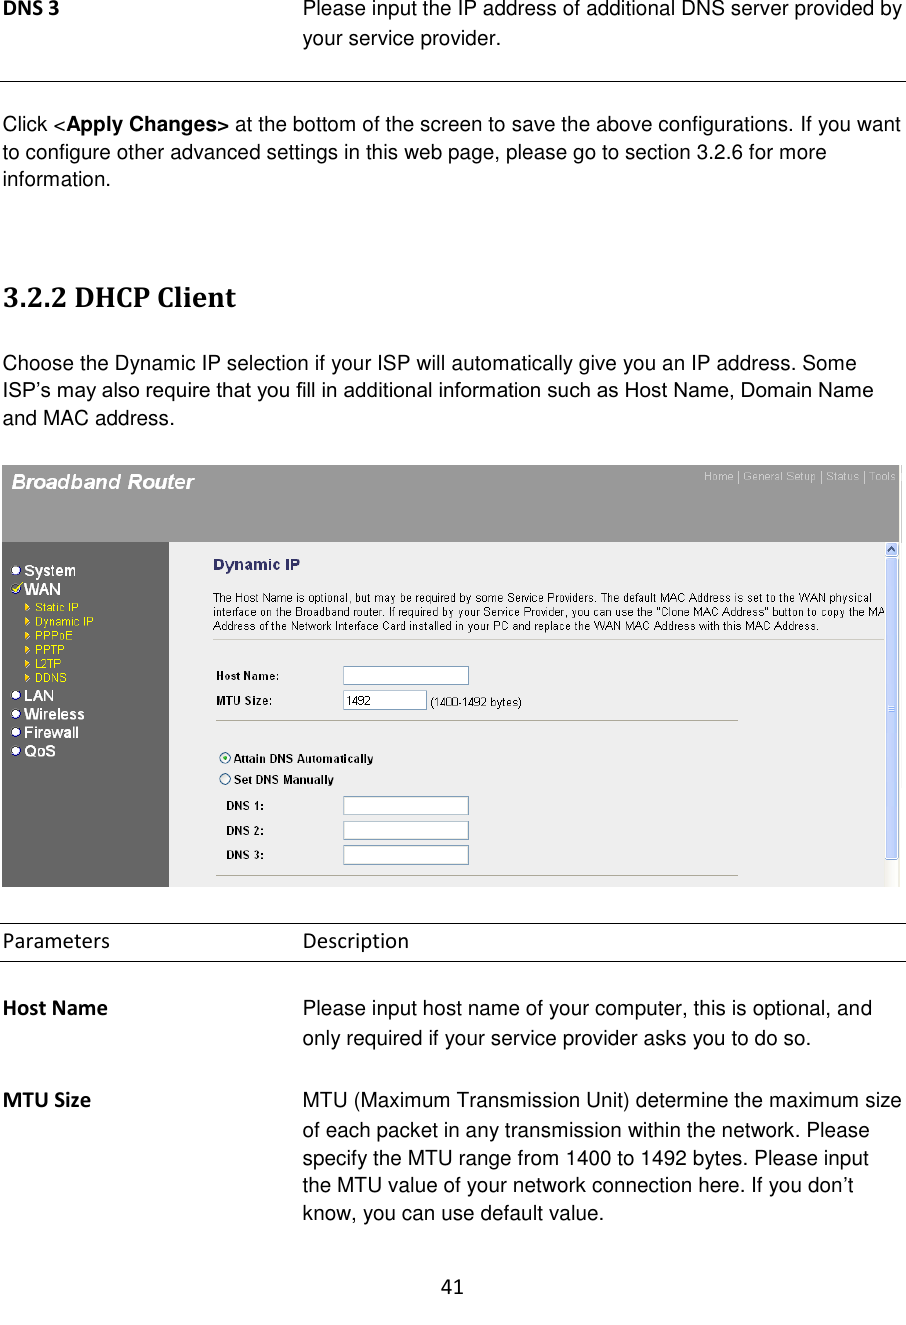 41  DNS 3  Please input the IP address of additional DNS server provided by your service provider.   Click &lt;Apply Changes&gt; at the bottom of the screen to save the above configurations. If you want to configure other advanced settings in this web page, please go to section 3.2.6 for more information.   3.2.2 DHCP Client  Choose the Dynamic IP selection if your ISP will automatically give you an IP address. Some ISP‟s may also require that you fill in additional information such as Host Name, Domain Name and MAC address.    Parameters      Description  Host Name Please input host name of your computer, this is optional, and only required if your service provider asks you to do so.  MTU Size MTU (Maximum Transmission Unit) determine the maximum size of each packet in any transmission within the network. Please specify the MTU range from 1400 to 1492 bytes. Please input the MTU value of your network connection here. If you don‟t know, you can use default value.  